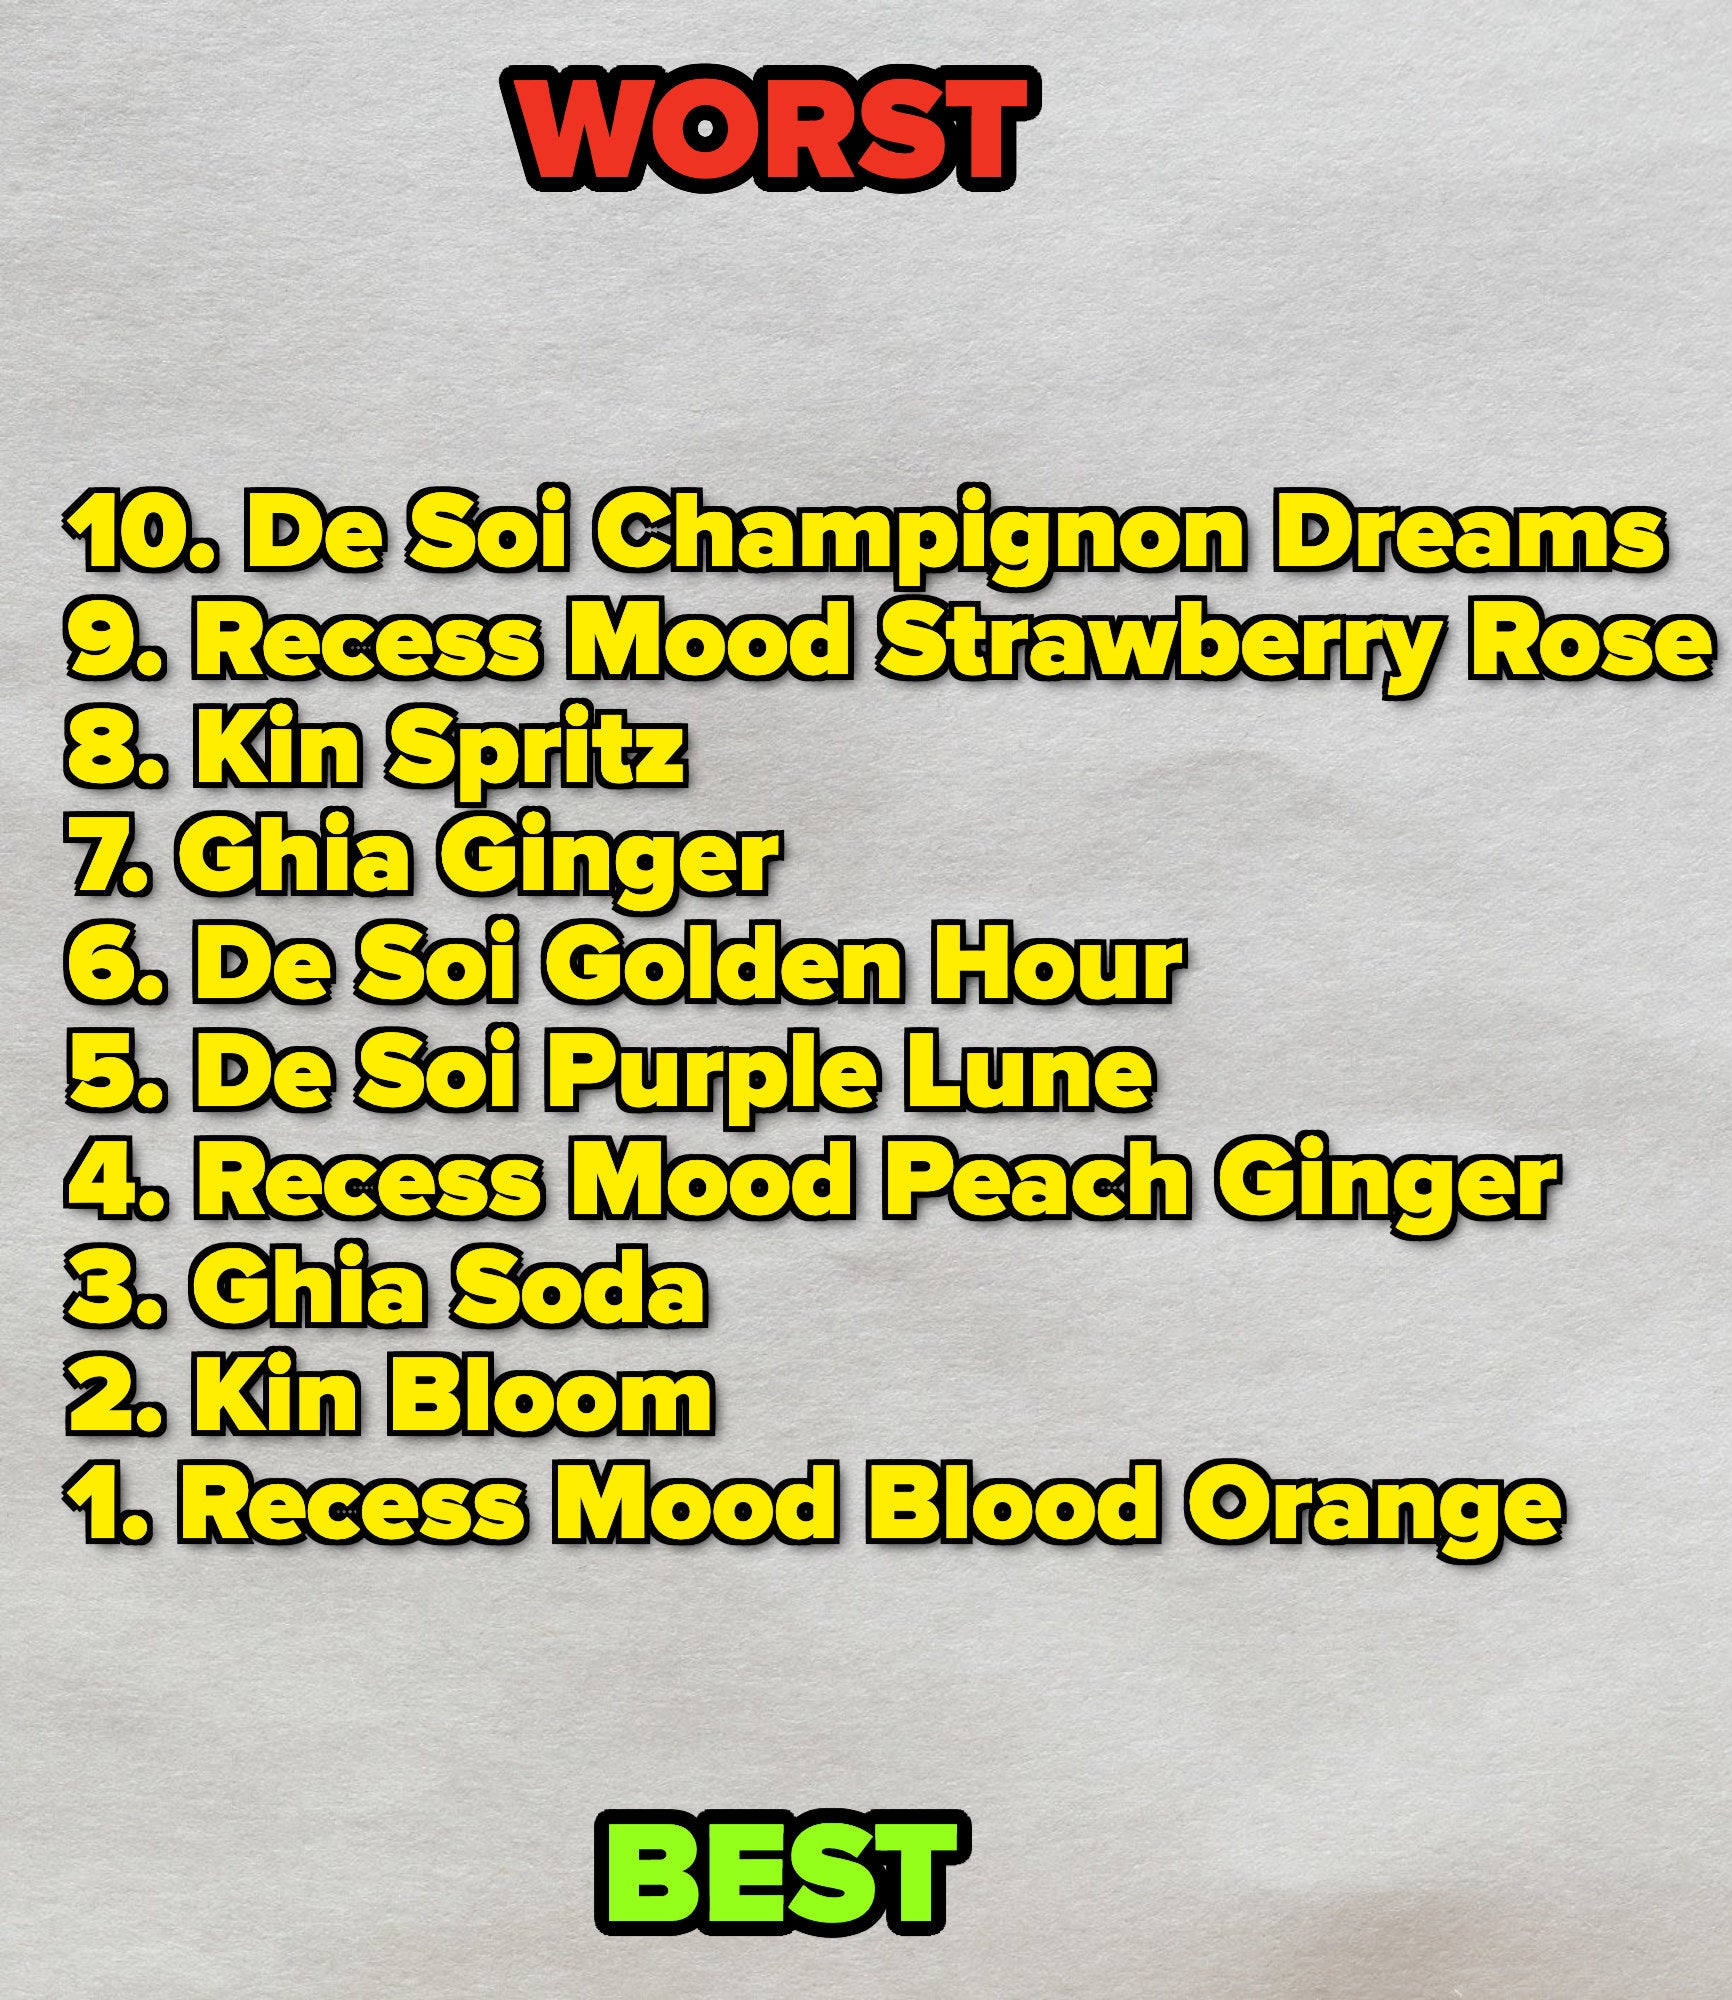 Rankings of 10 seltzers from least (De Soi Champignon Dreams) to best (Recess Mood Blood Orange), with De Soi Purple Lune in the middle (fifth)